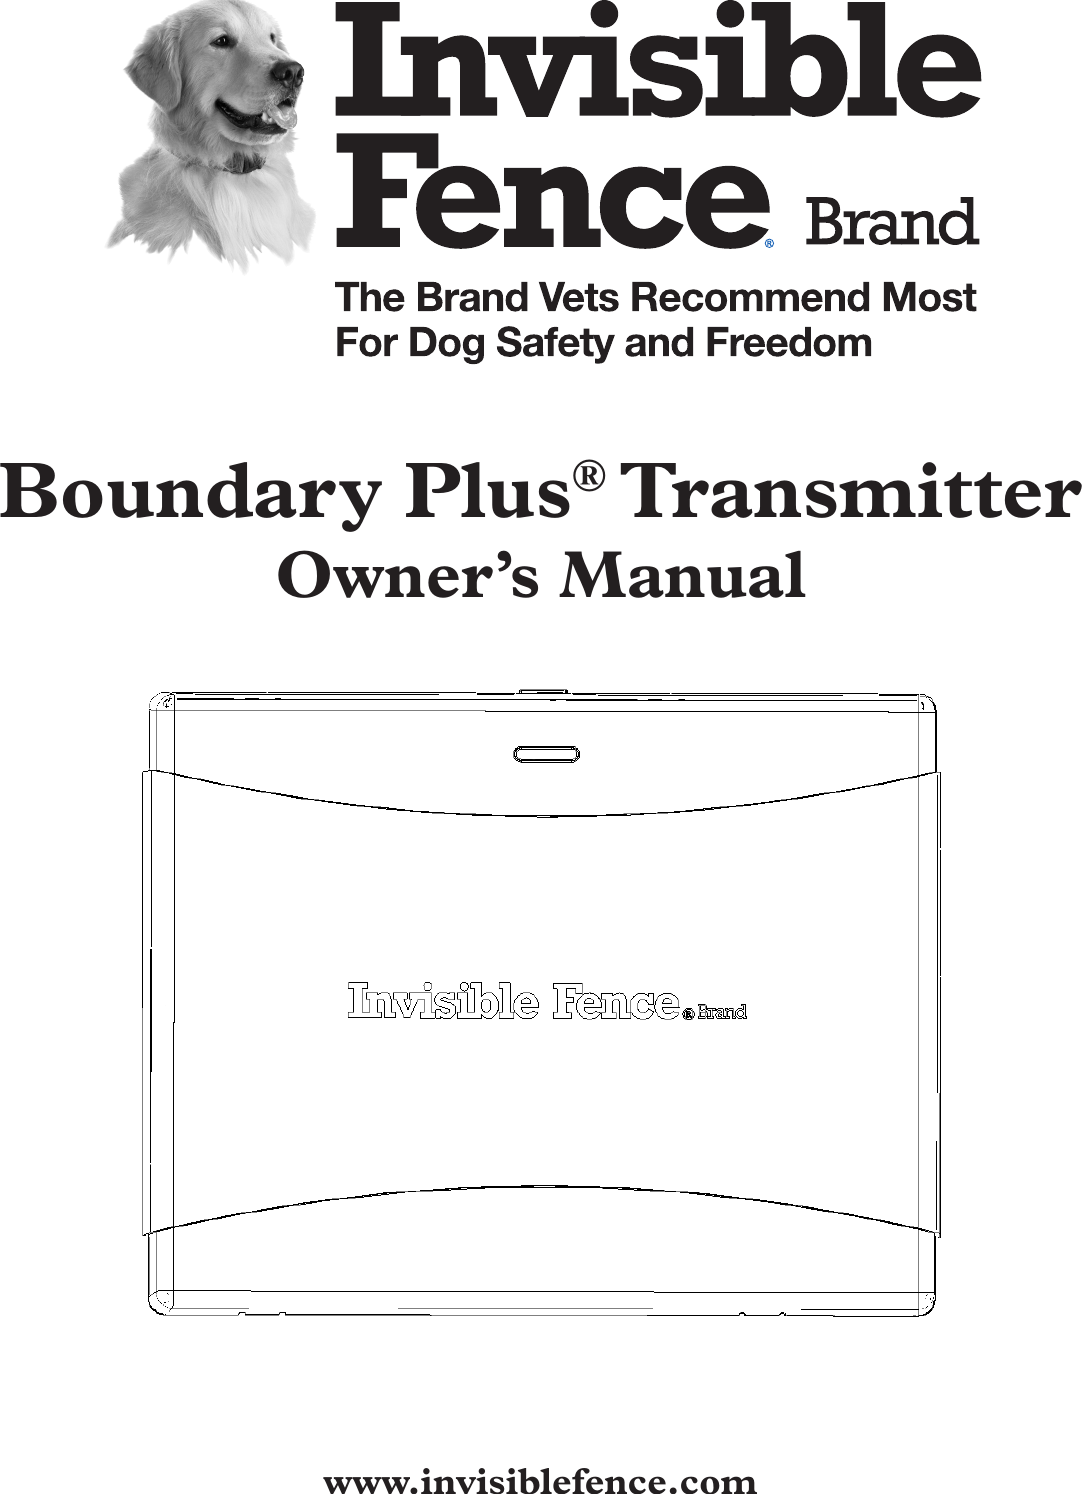 Boundary Plus® TransmitterOwner’s Manualwww.invisiblefence.com